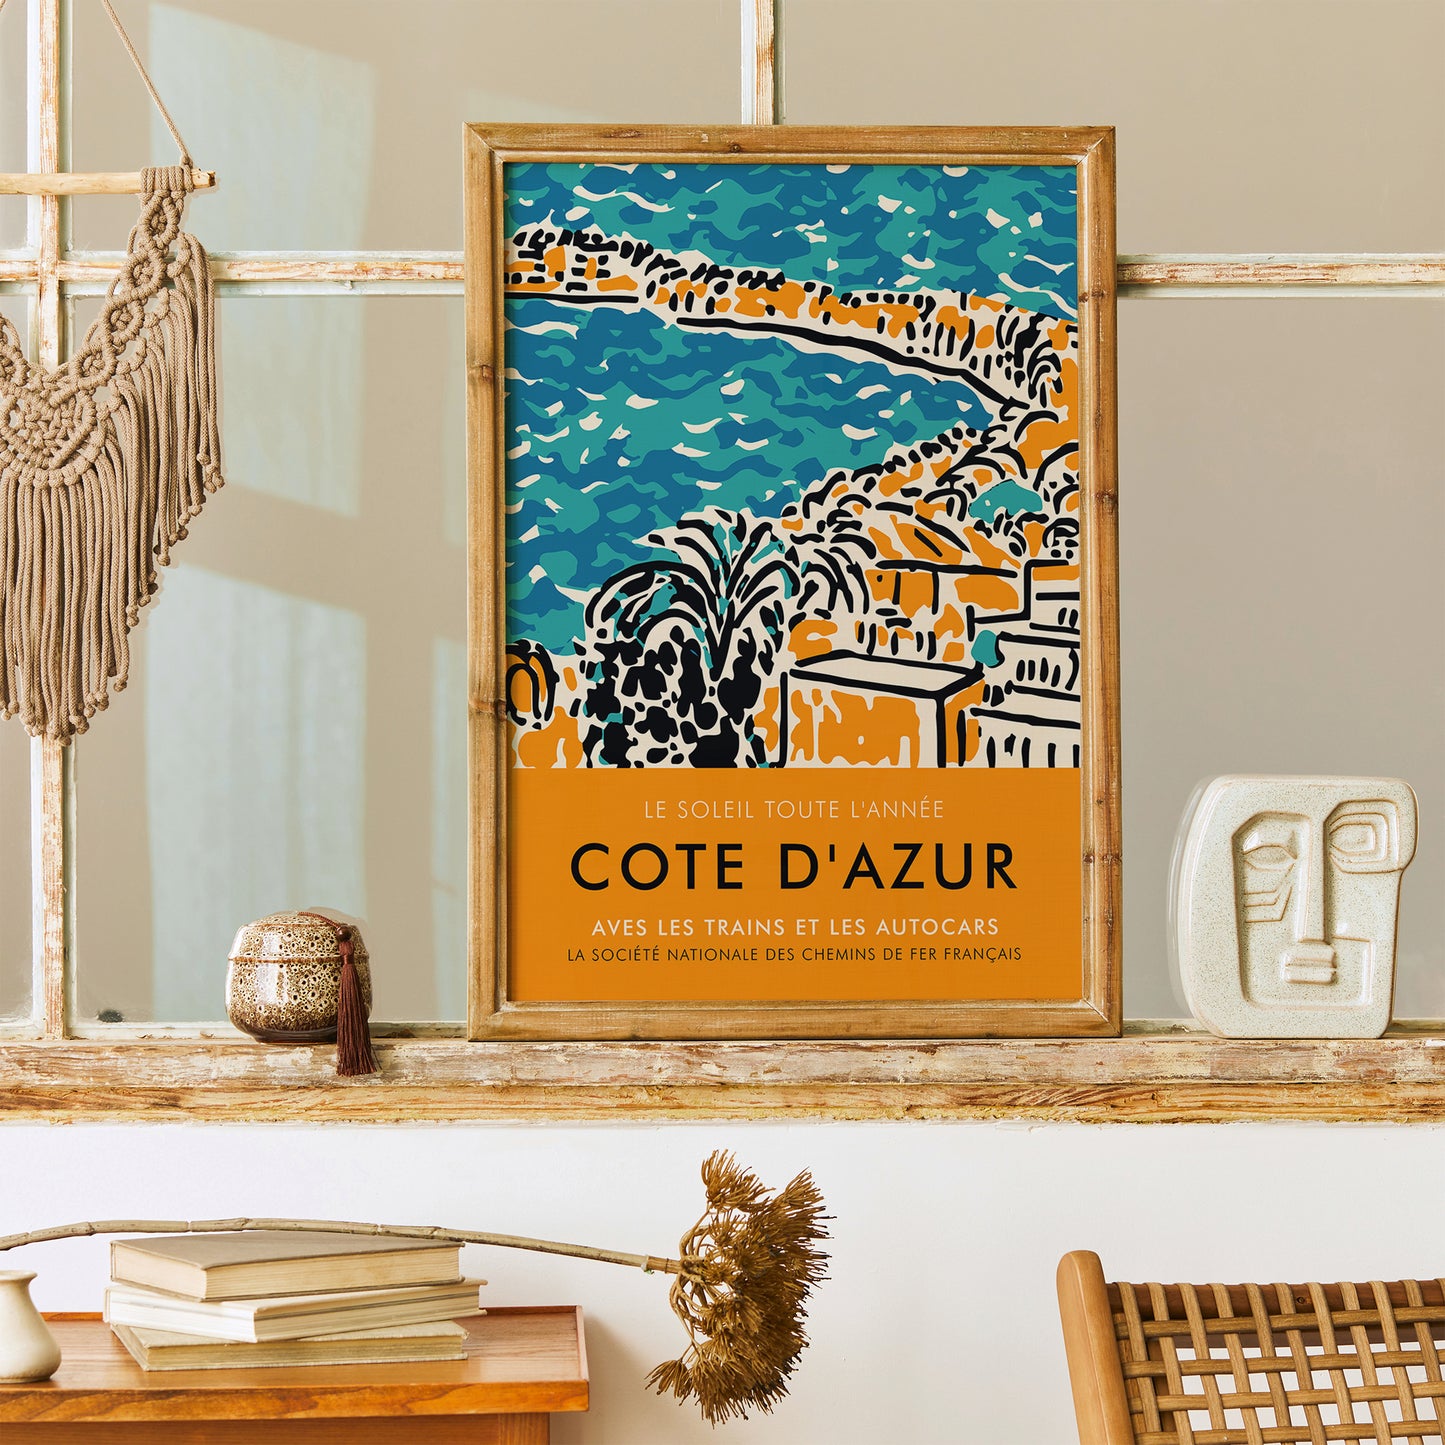 Yellow Cote d Azur French Riviera Poster